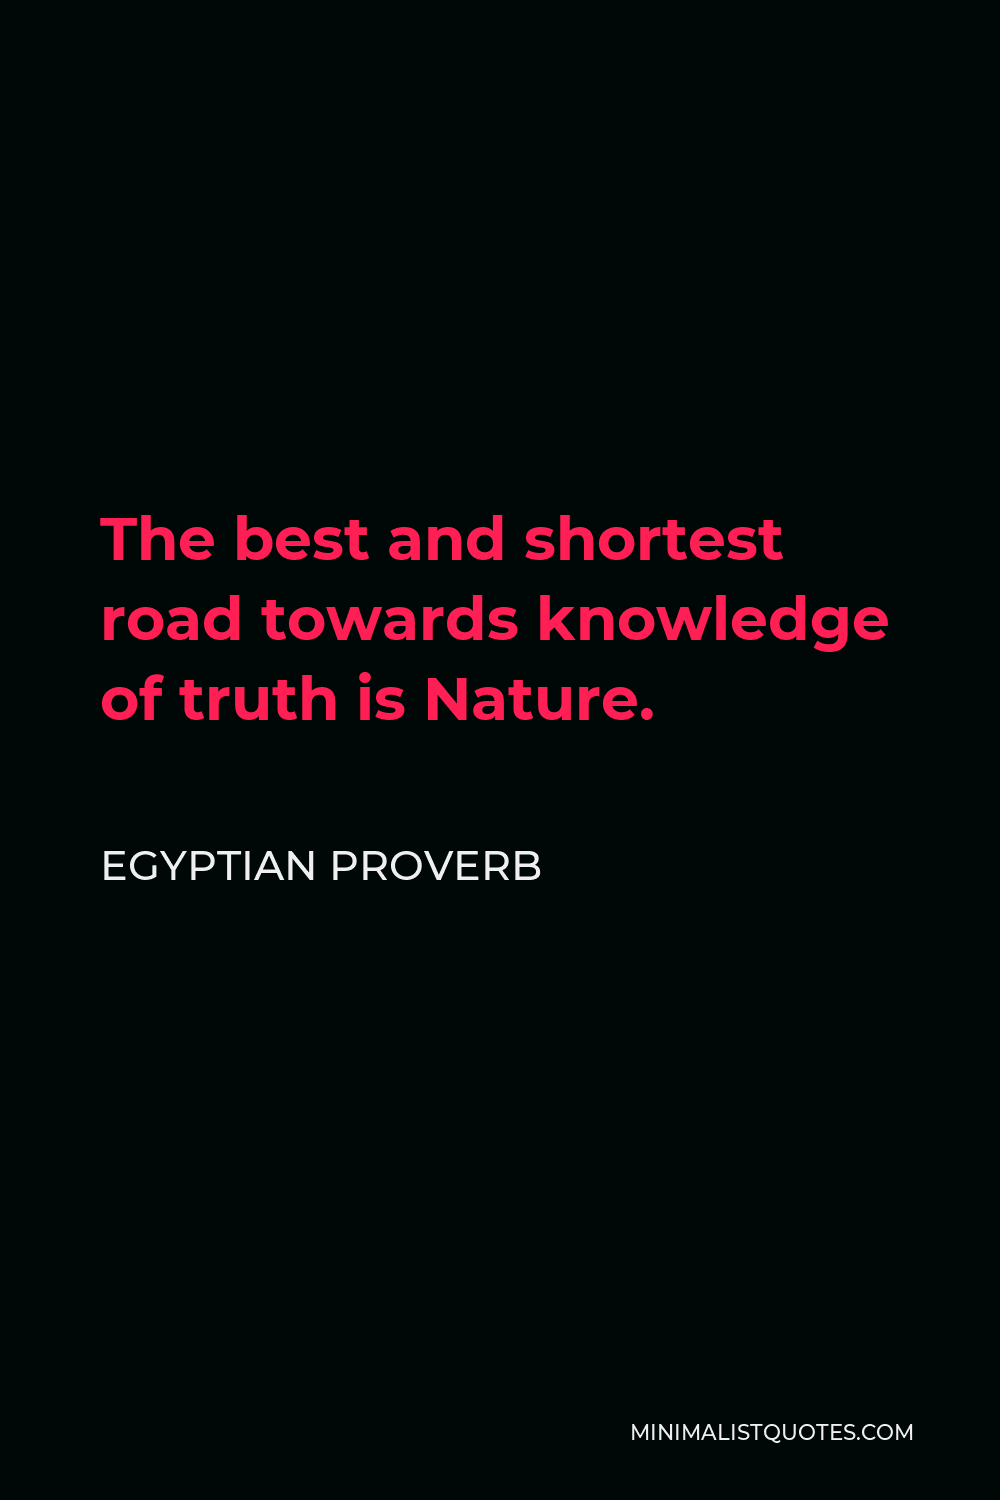 Egyptian Proverb Quote - The best and shortest road towards knowledge of truth is Nature.